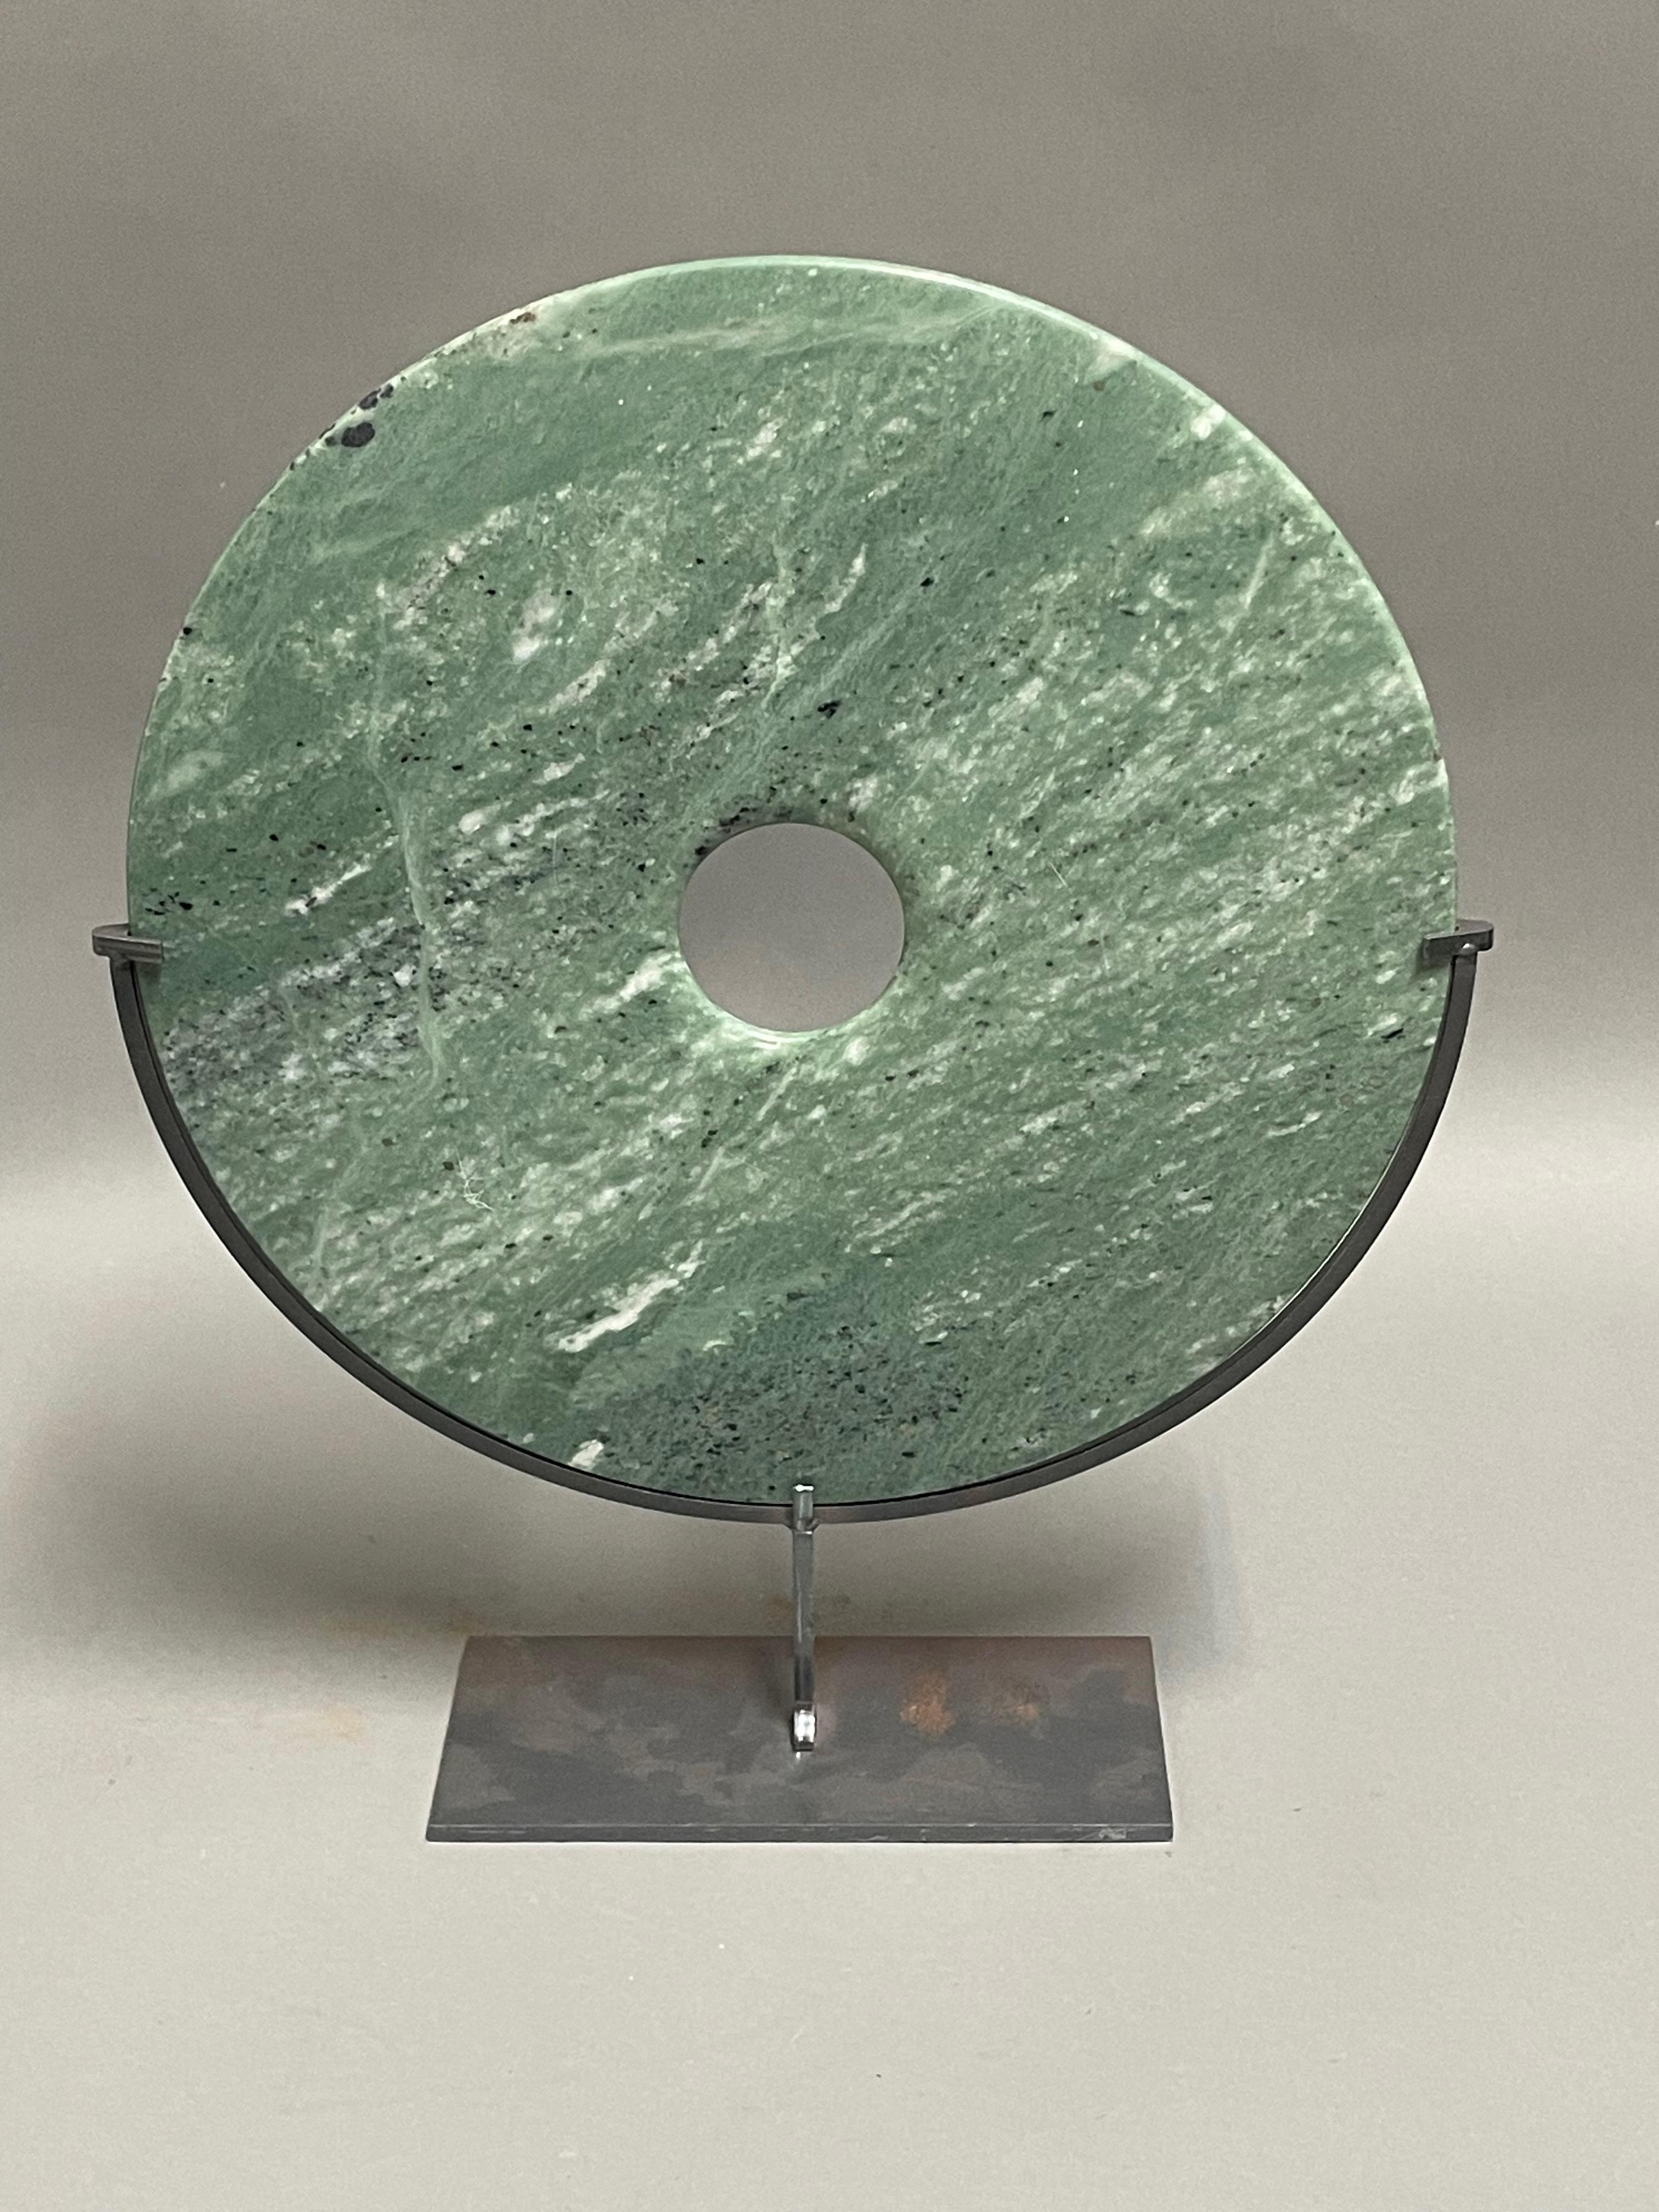 Contemporary Chinese set of two jade colored jade discs.
One disc measures  12d  x  15h    stand measures  7  x   3
One disc measures    8d   x  11h    stand measures  5  x  2.5
Sits nicely with hand carved stone shrimp  S6777
Sits nicely with hand